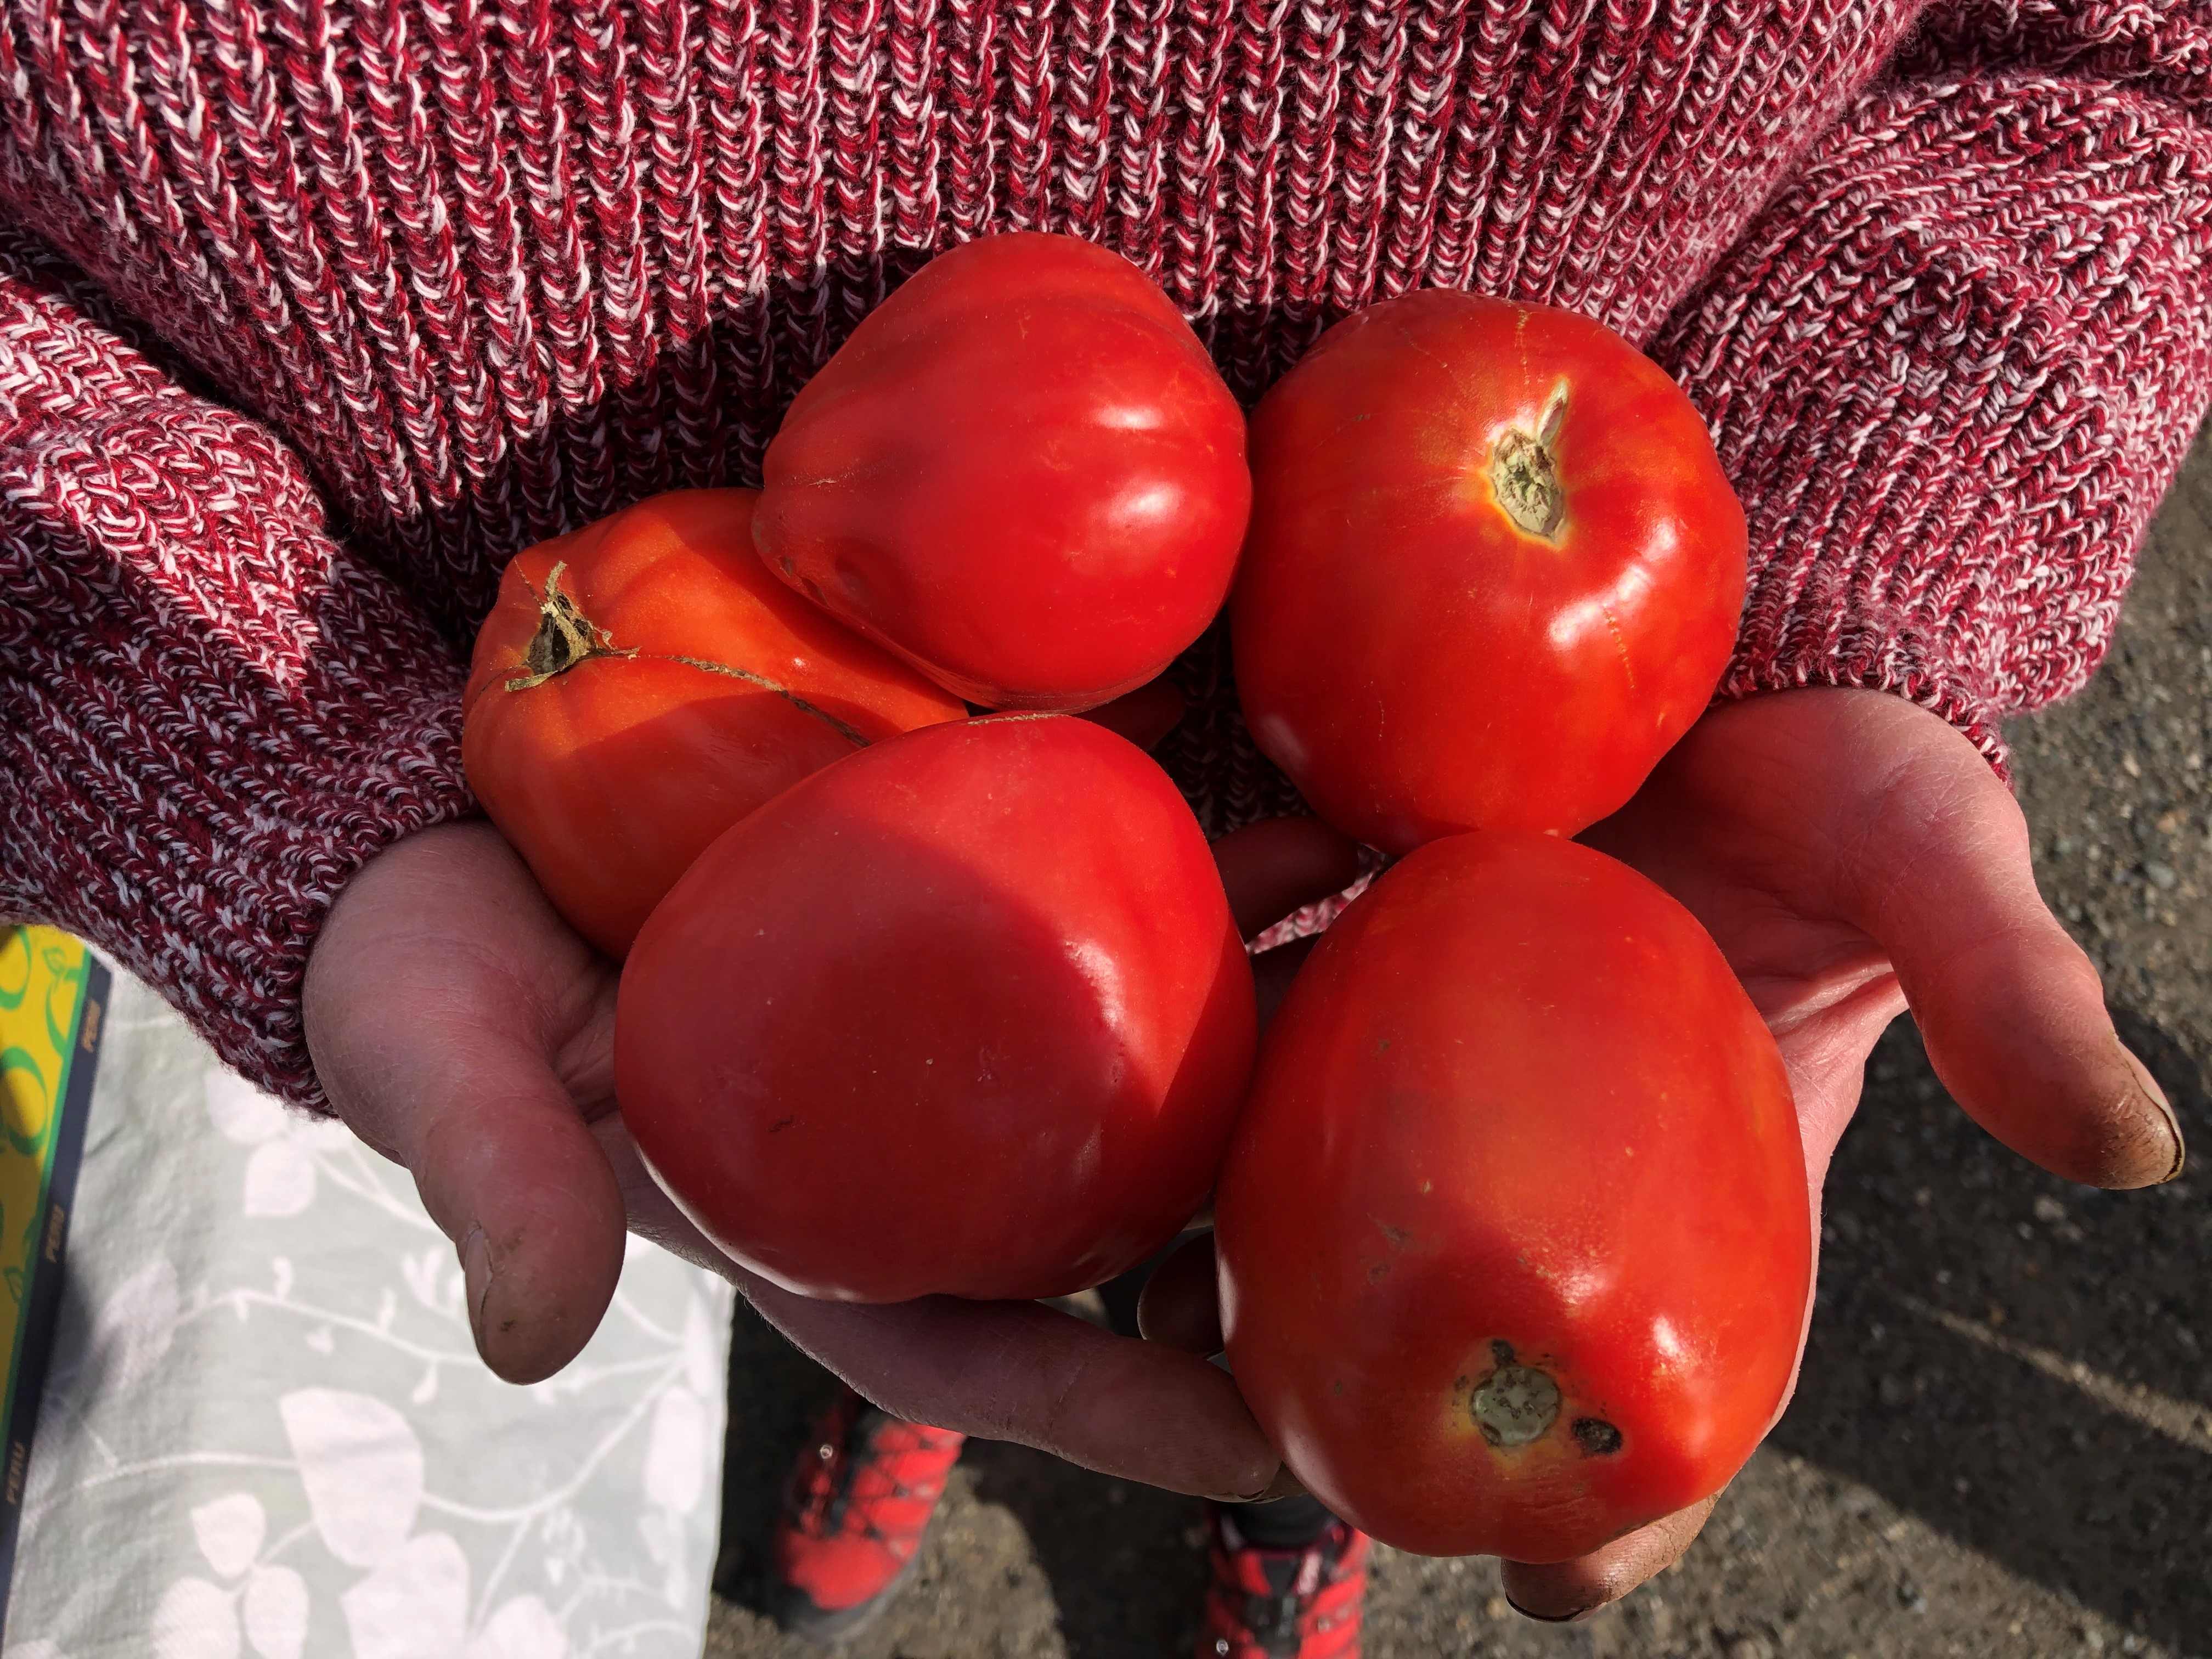 Five large red tomatoes cradled in the hands of a person wearing a red sweater